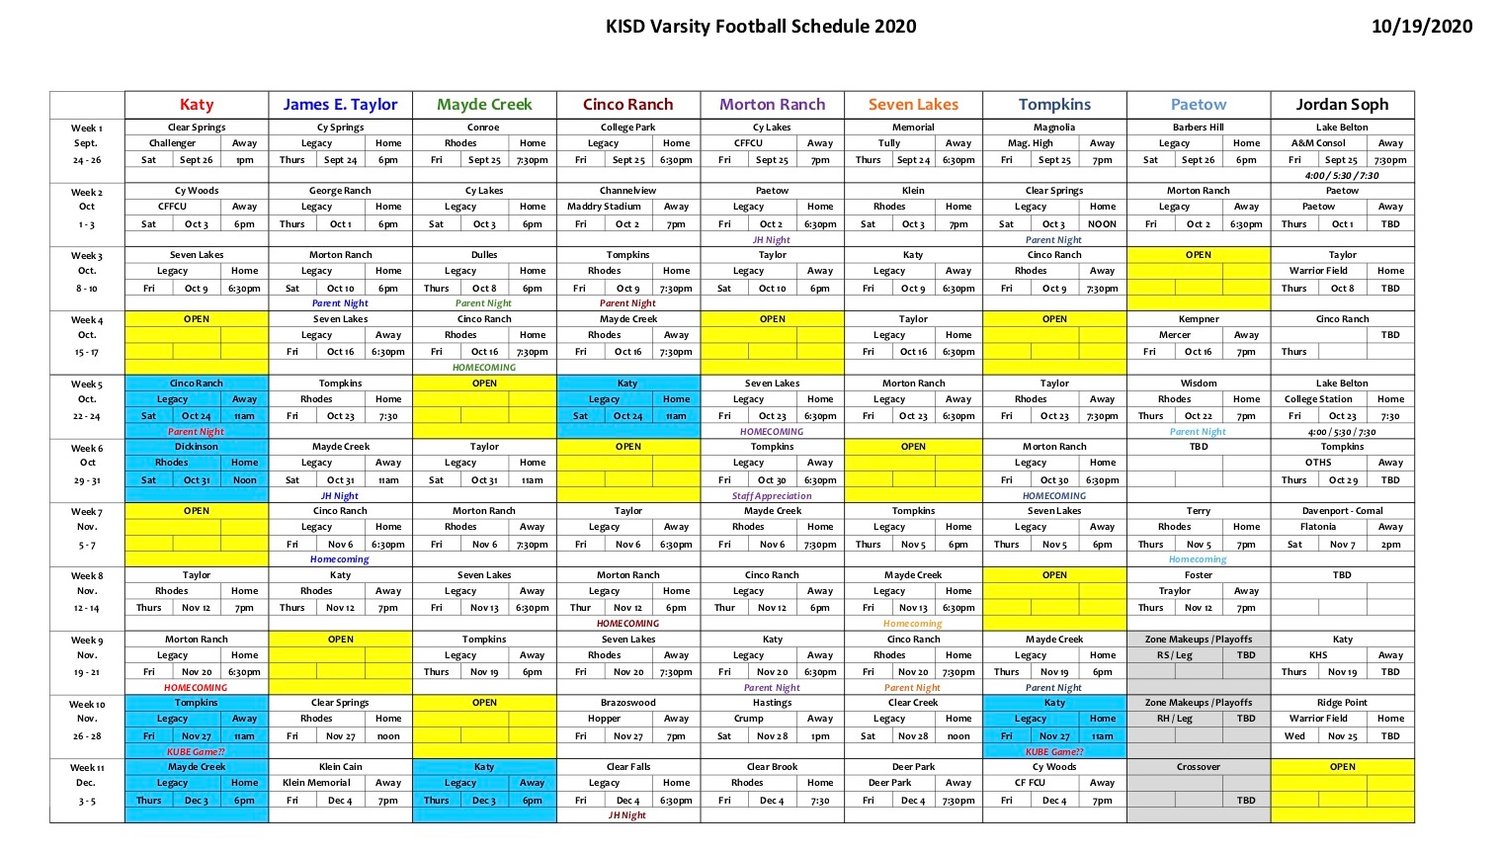 Revised Katy ISD varsity football schedule, as of Oct. 19. Games highlighted in blue mark changes.